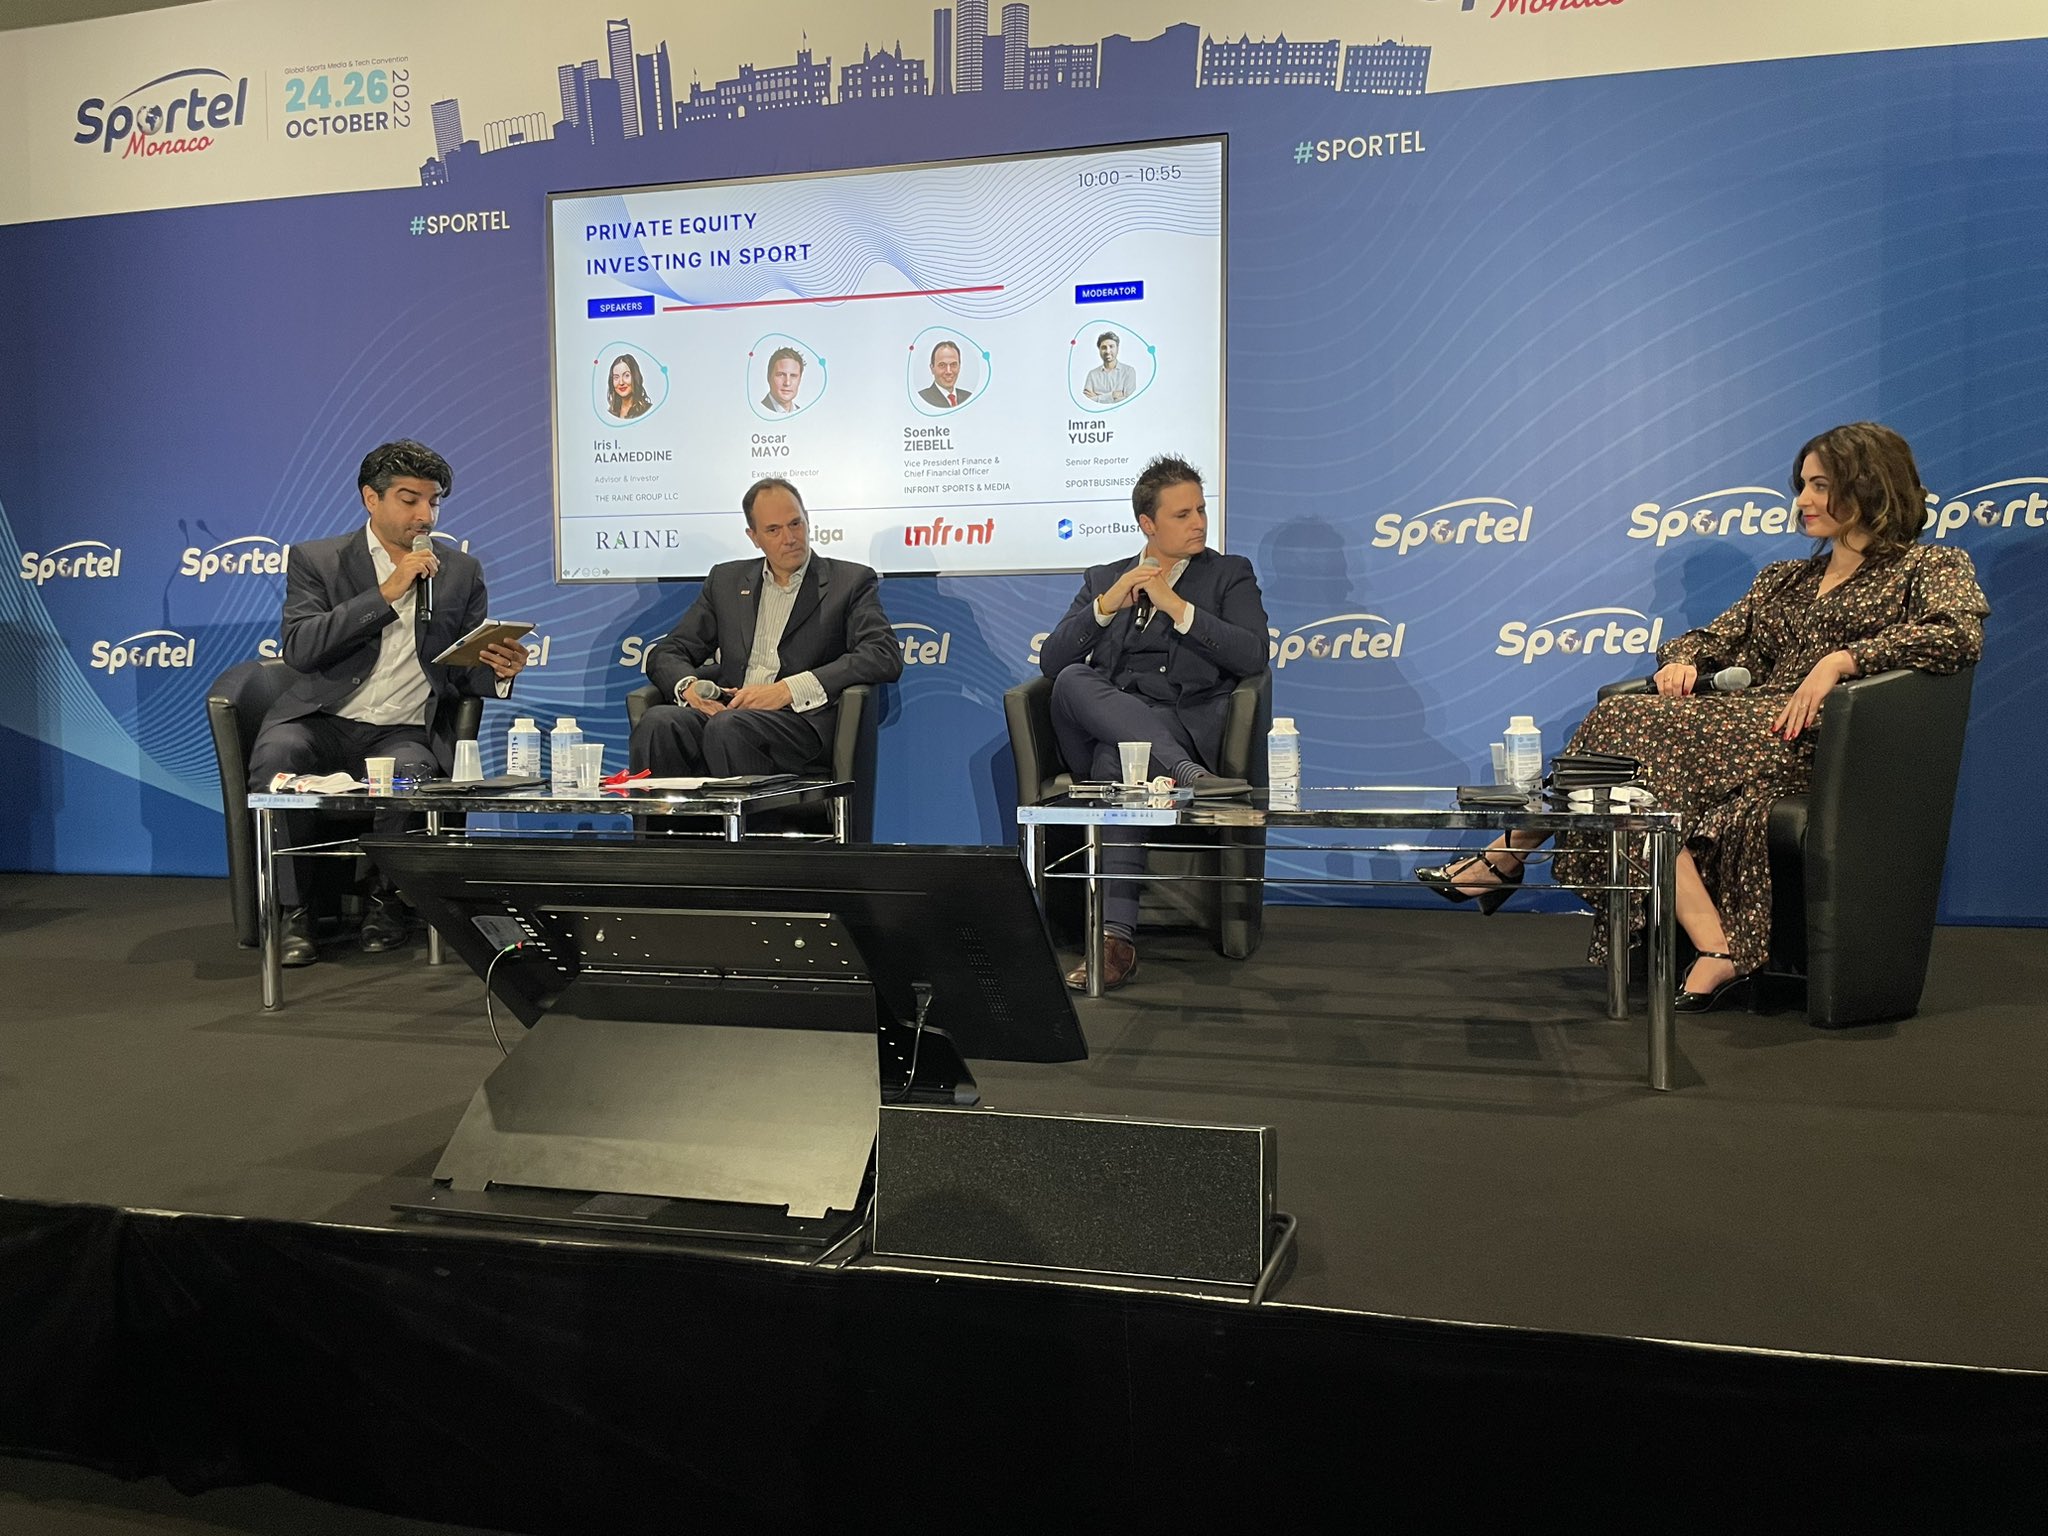 SPORTEL Monaco started today with panels on investment, culture and innovation in sport